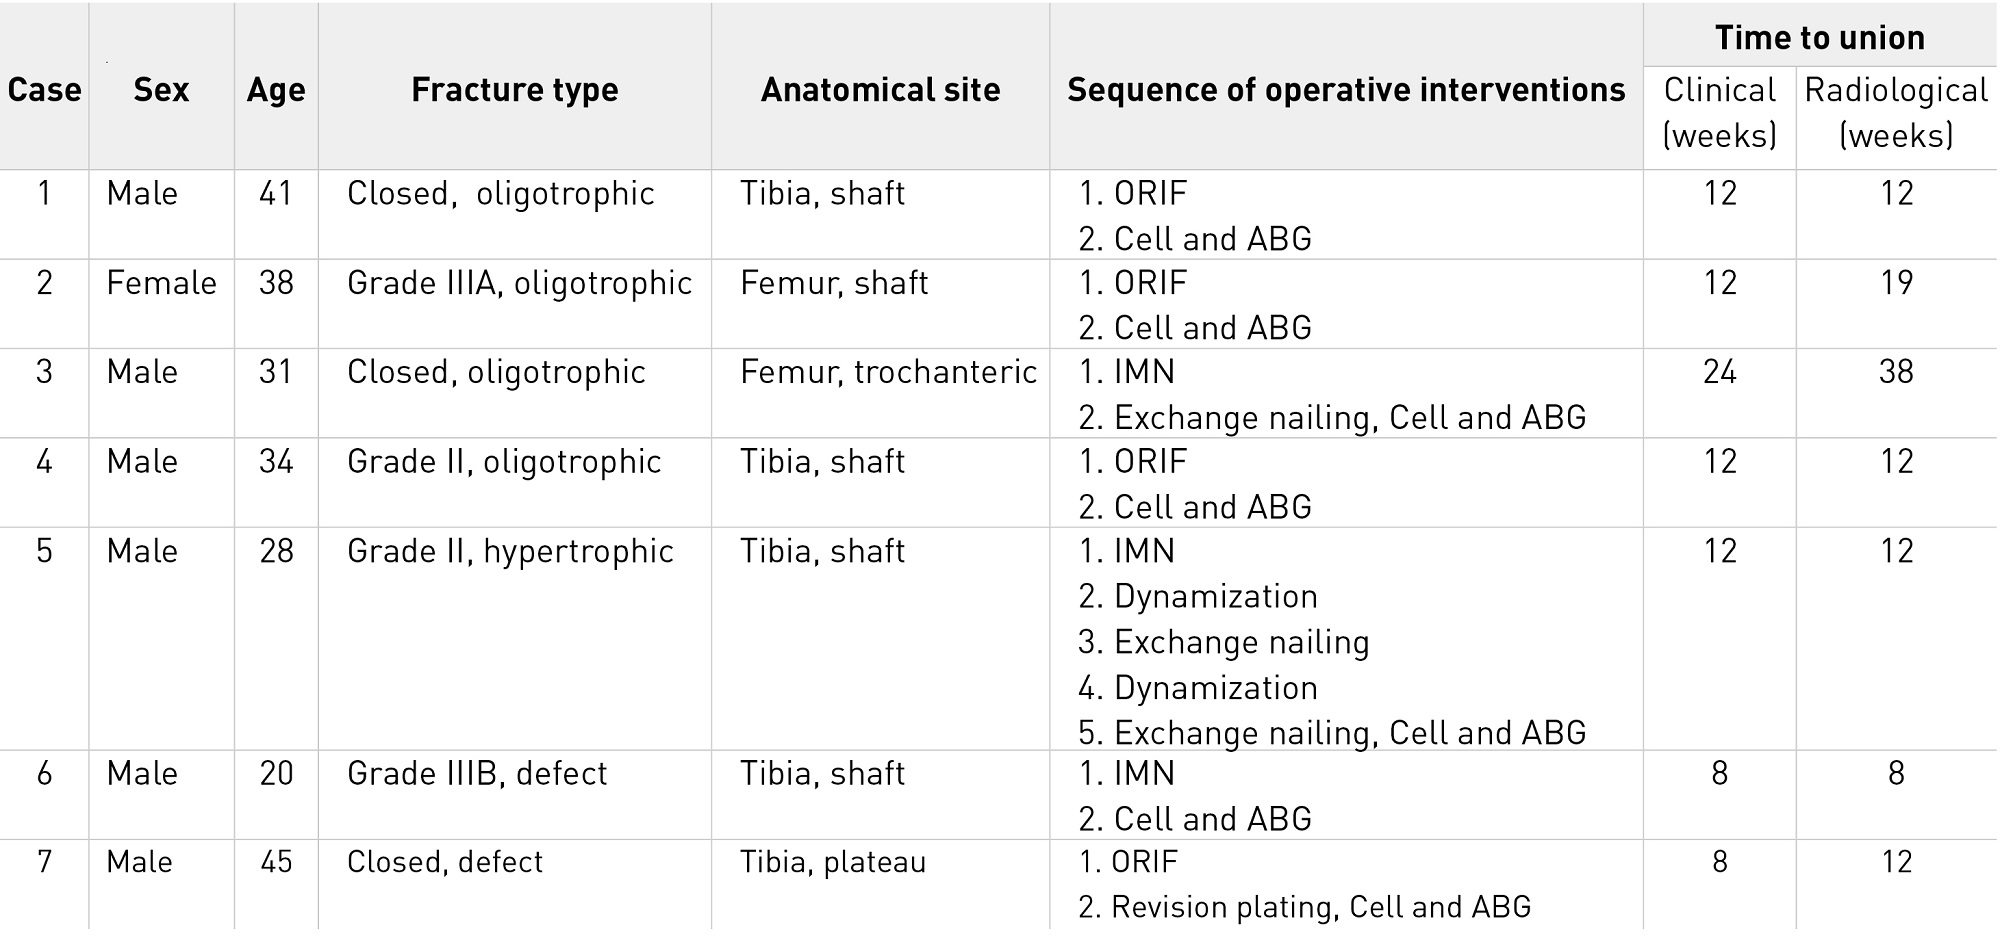 Table 2. Clinical and radiological outcomes for each patient in the phase I/II clinical study. Abbreviations: ABG, autologous bone grafting; Cell, transplantation of autologous peripheral blood CD34+ cells; IMN, intramedullary nailing; ORIF, open reduction and internal fixation.